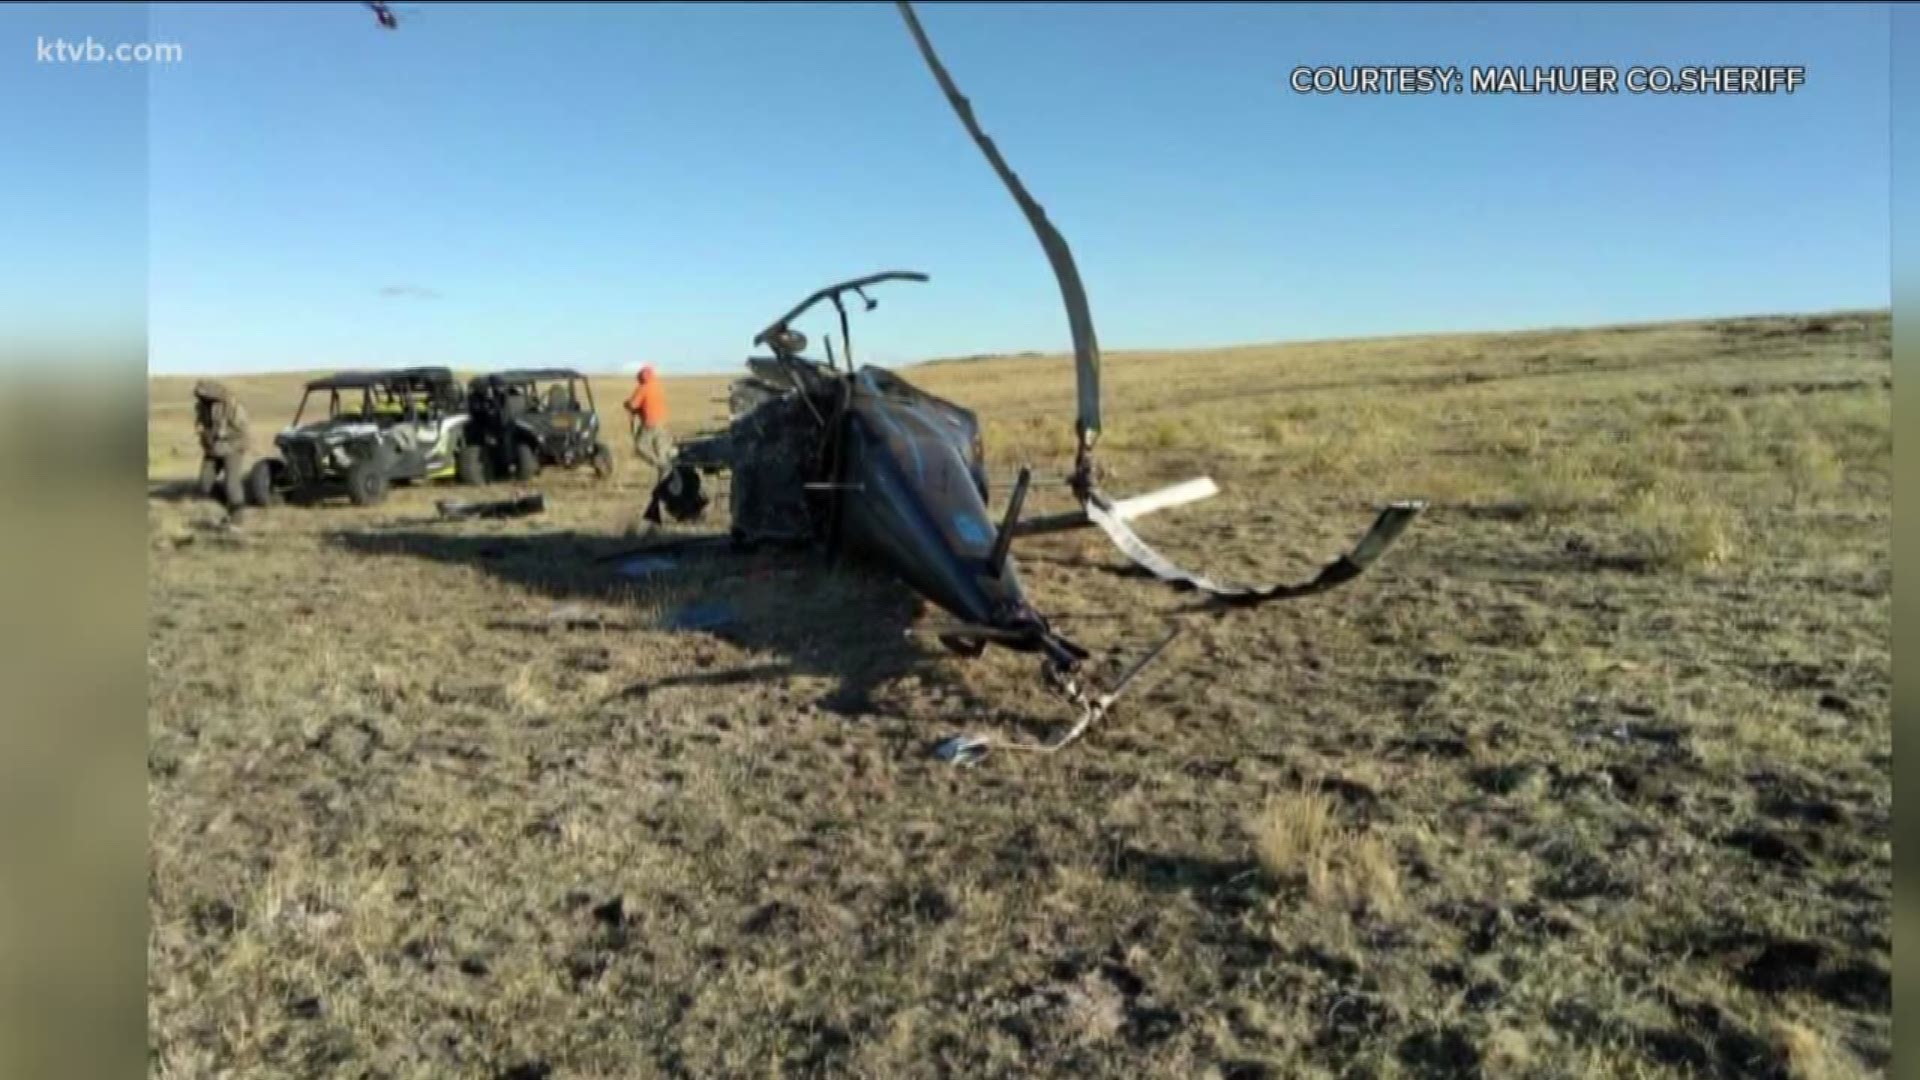 Authorities say the helicopter went down Friday afternoon. The man's daughter survived the crash.